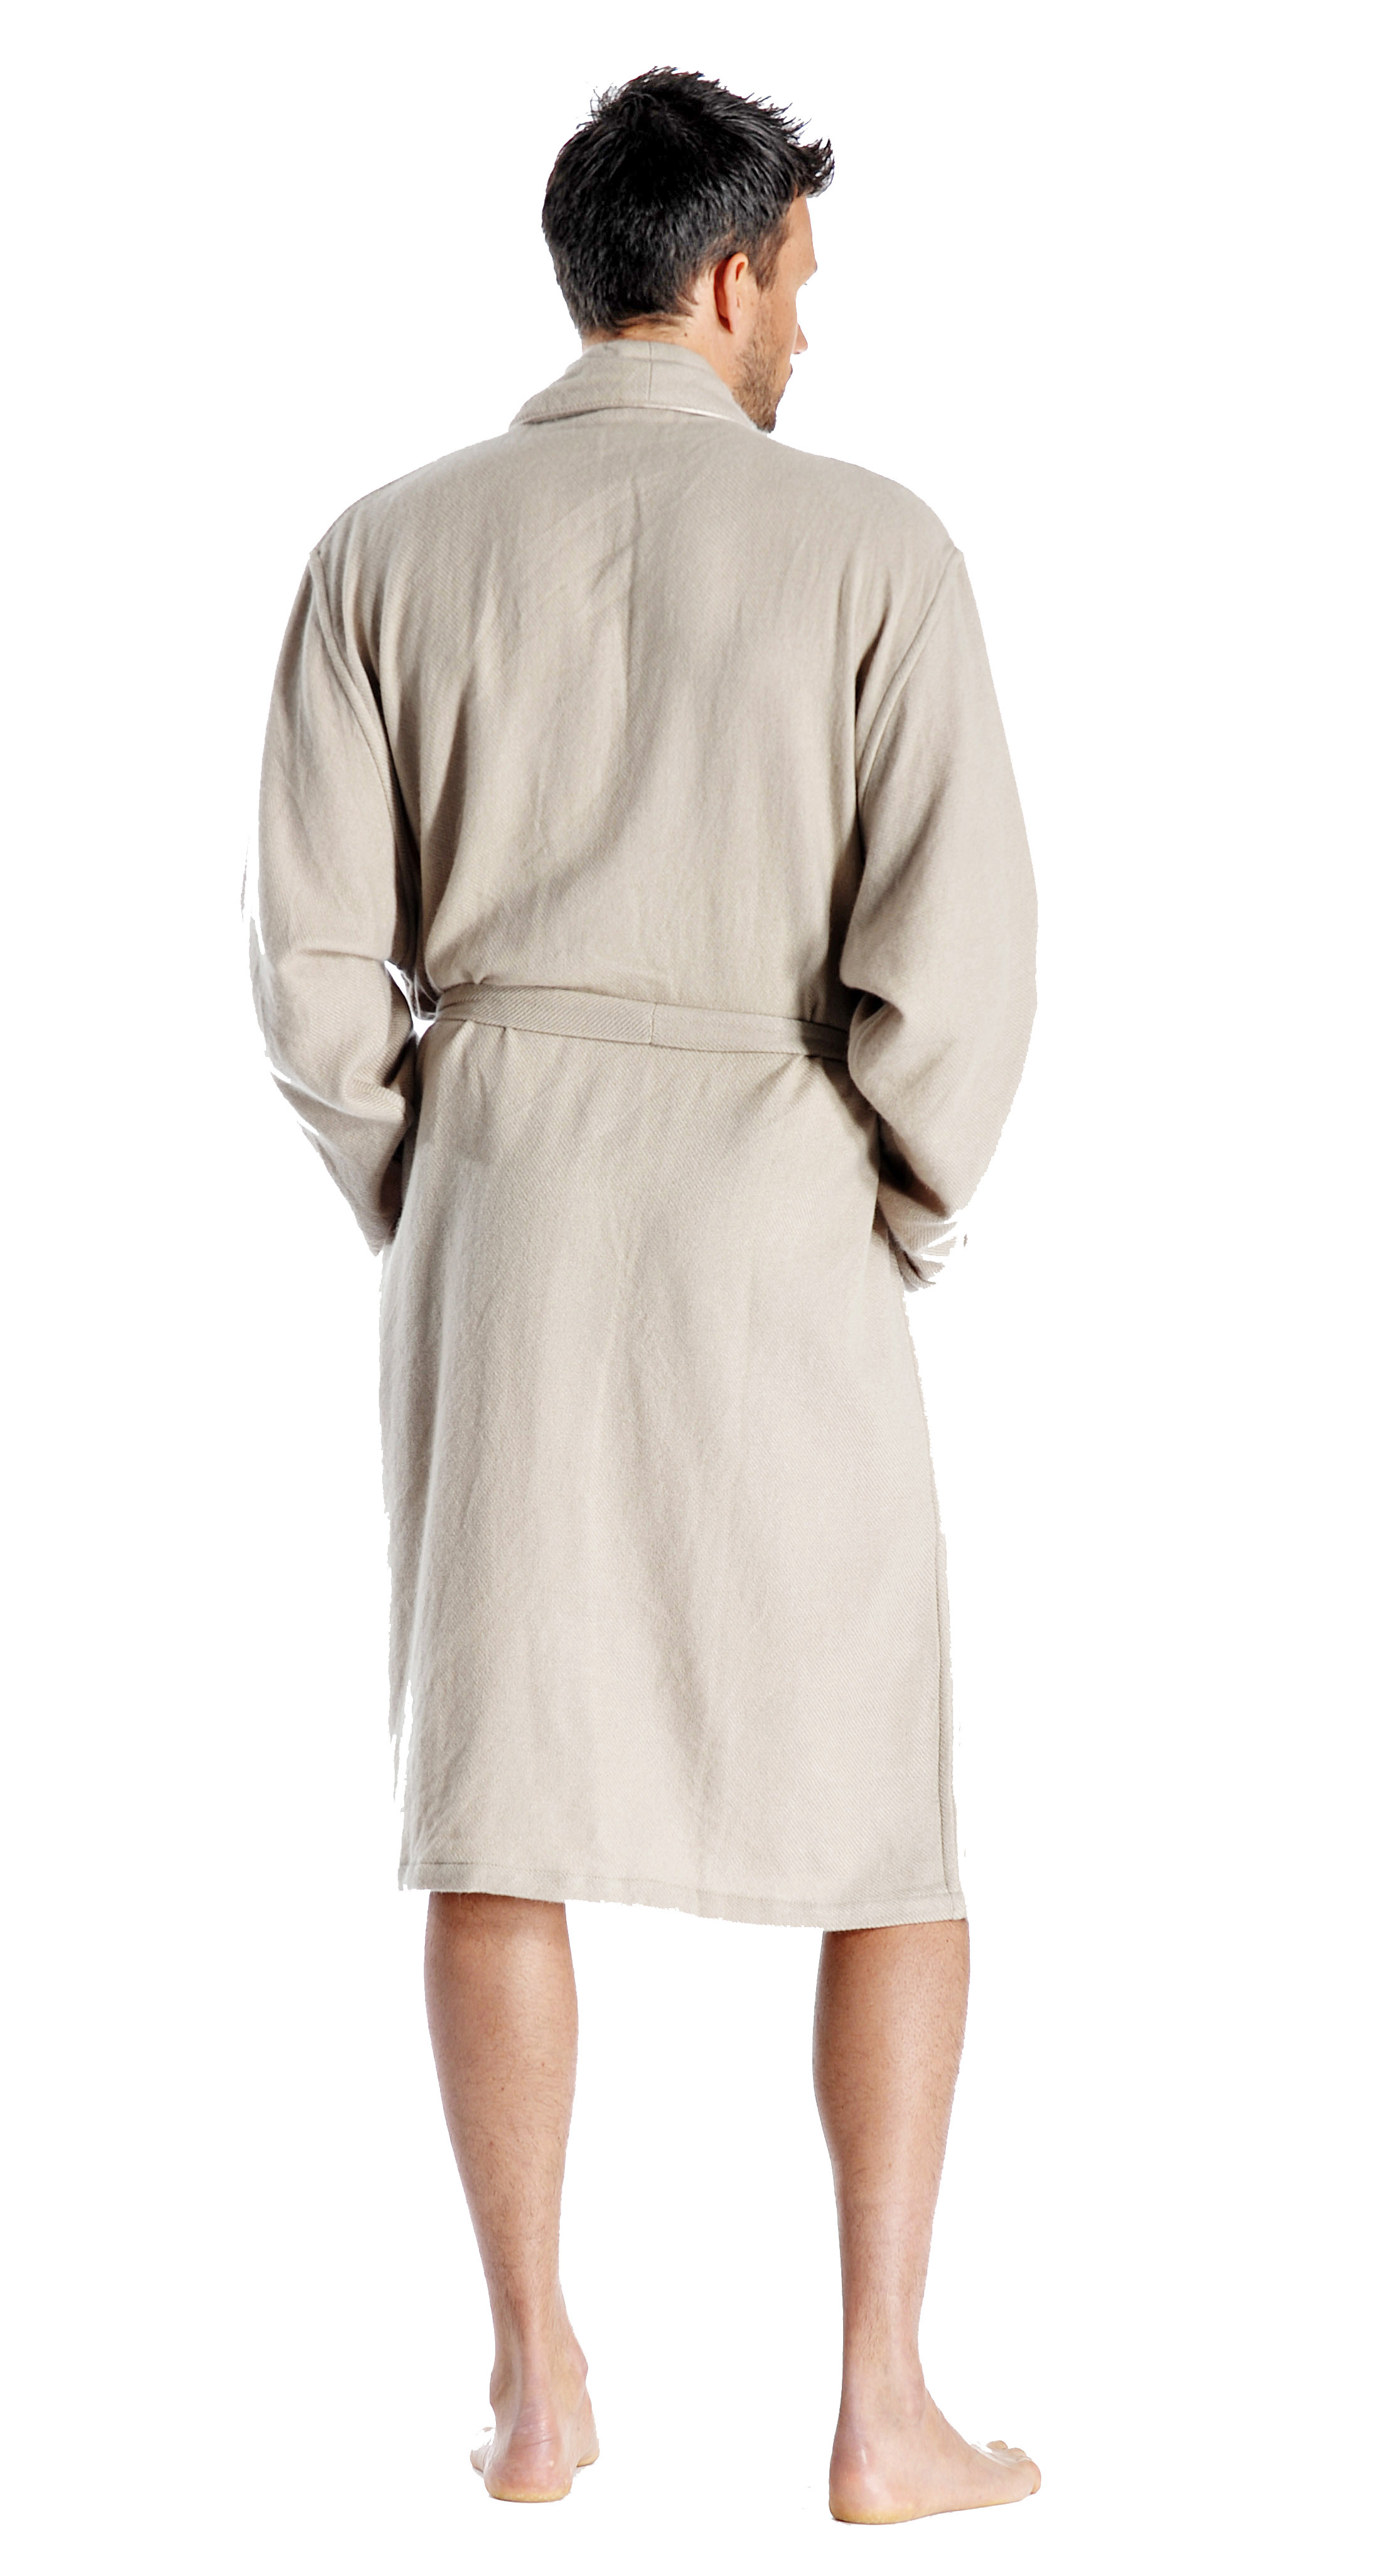 Pure Cashmere Knee Length Robe for Men (Earth Grey, Small/Medium)